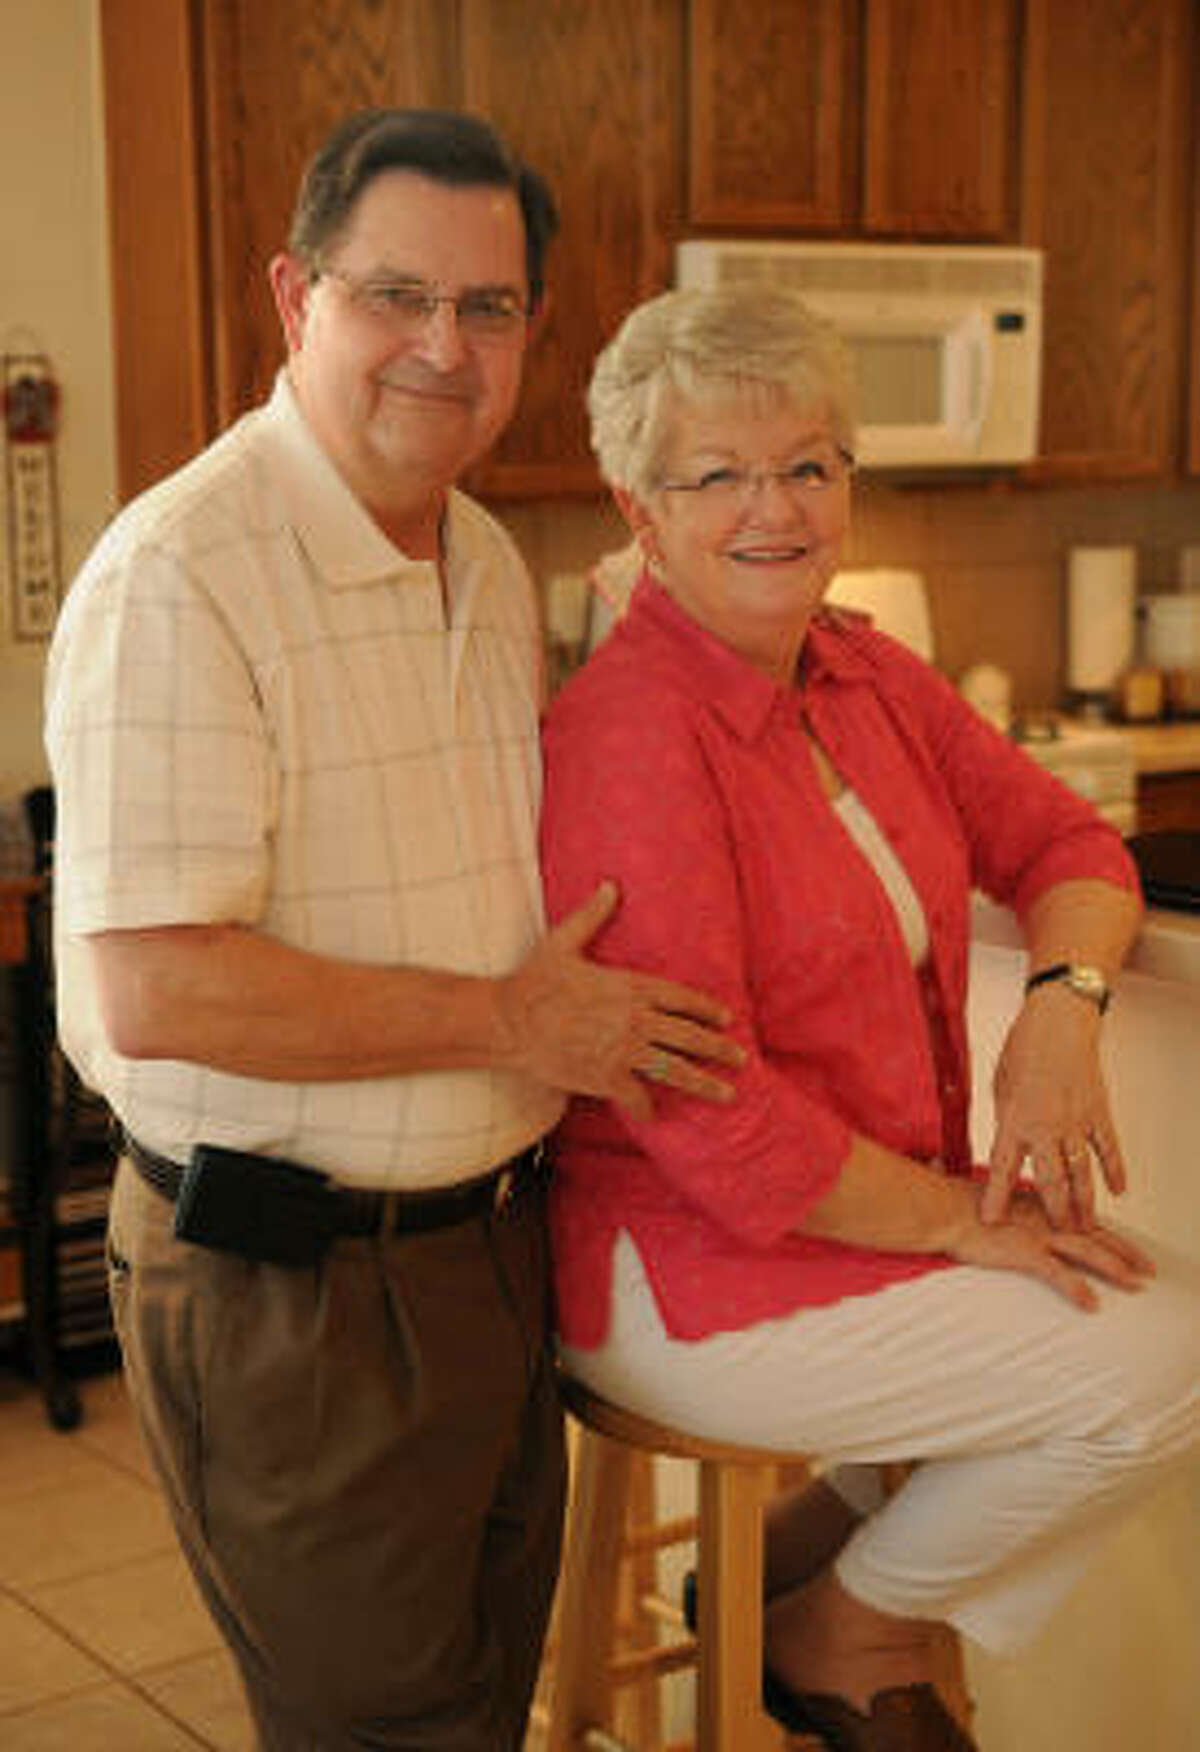 James Eby and his wife, Peggy, of Conroe, turned to a health care sharing ministry to pay the $25,000 bill for her heart surgery last year instead of using an insurance company.